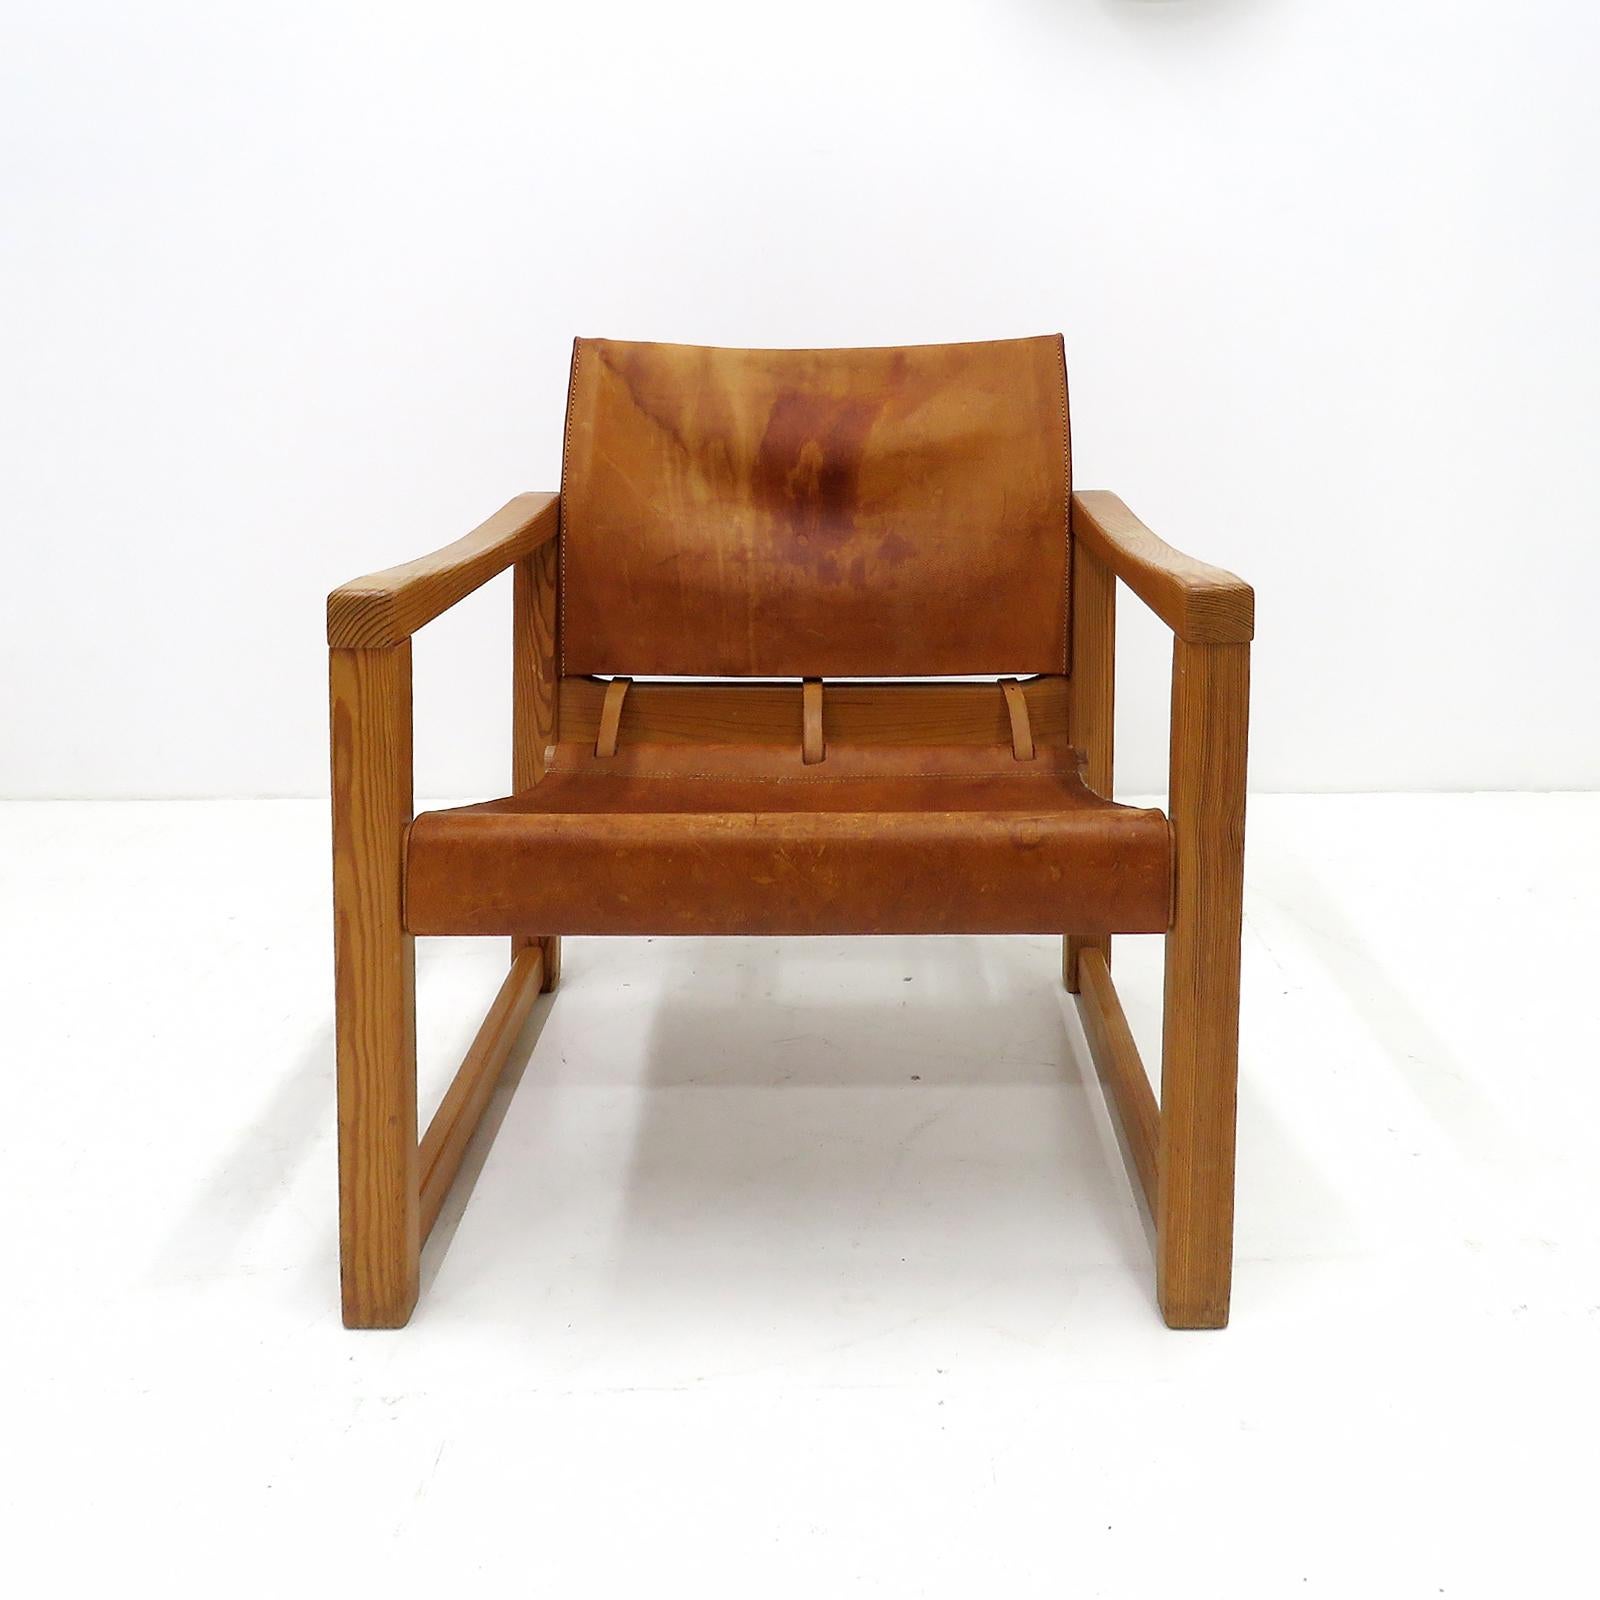 Wonderful, compact Danish modern safari chair by Karin Mobring, Sweden, designed in 1970, pine frame with leather upholstery, stains